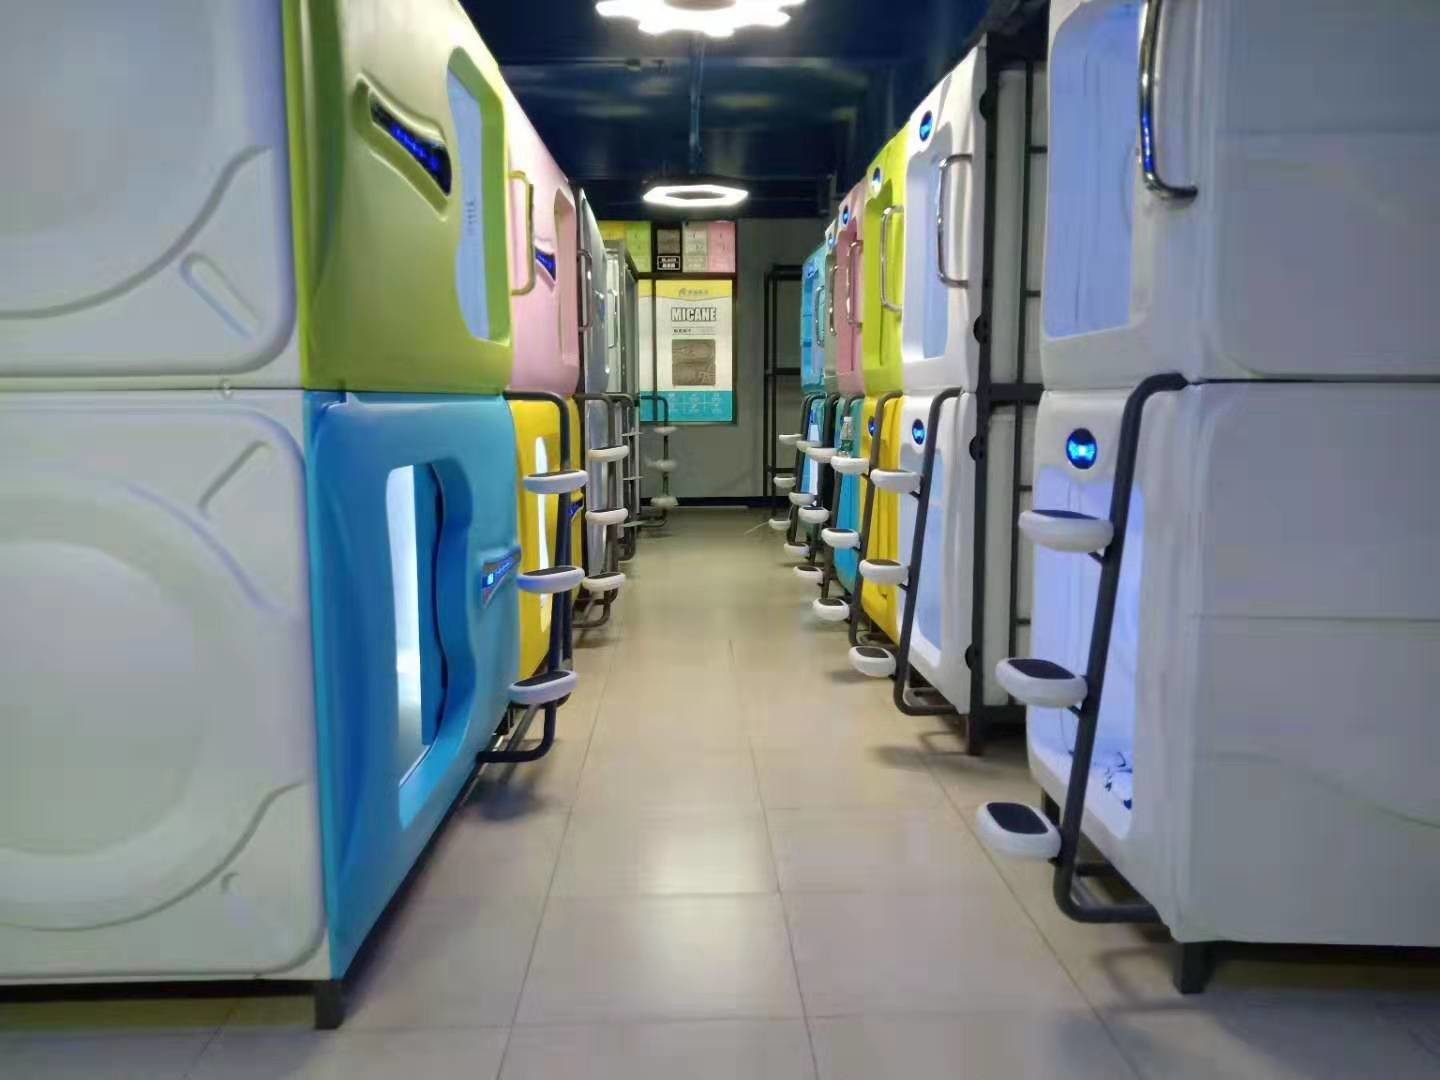 Latest company case about Capsule Hotel in Hong Kong